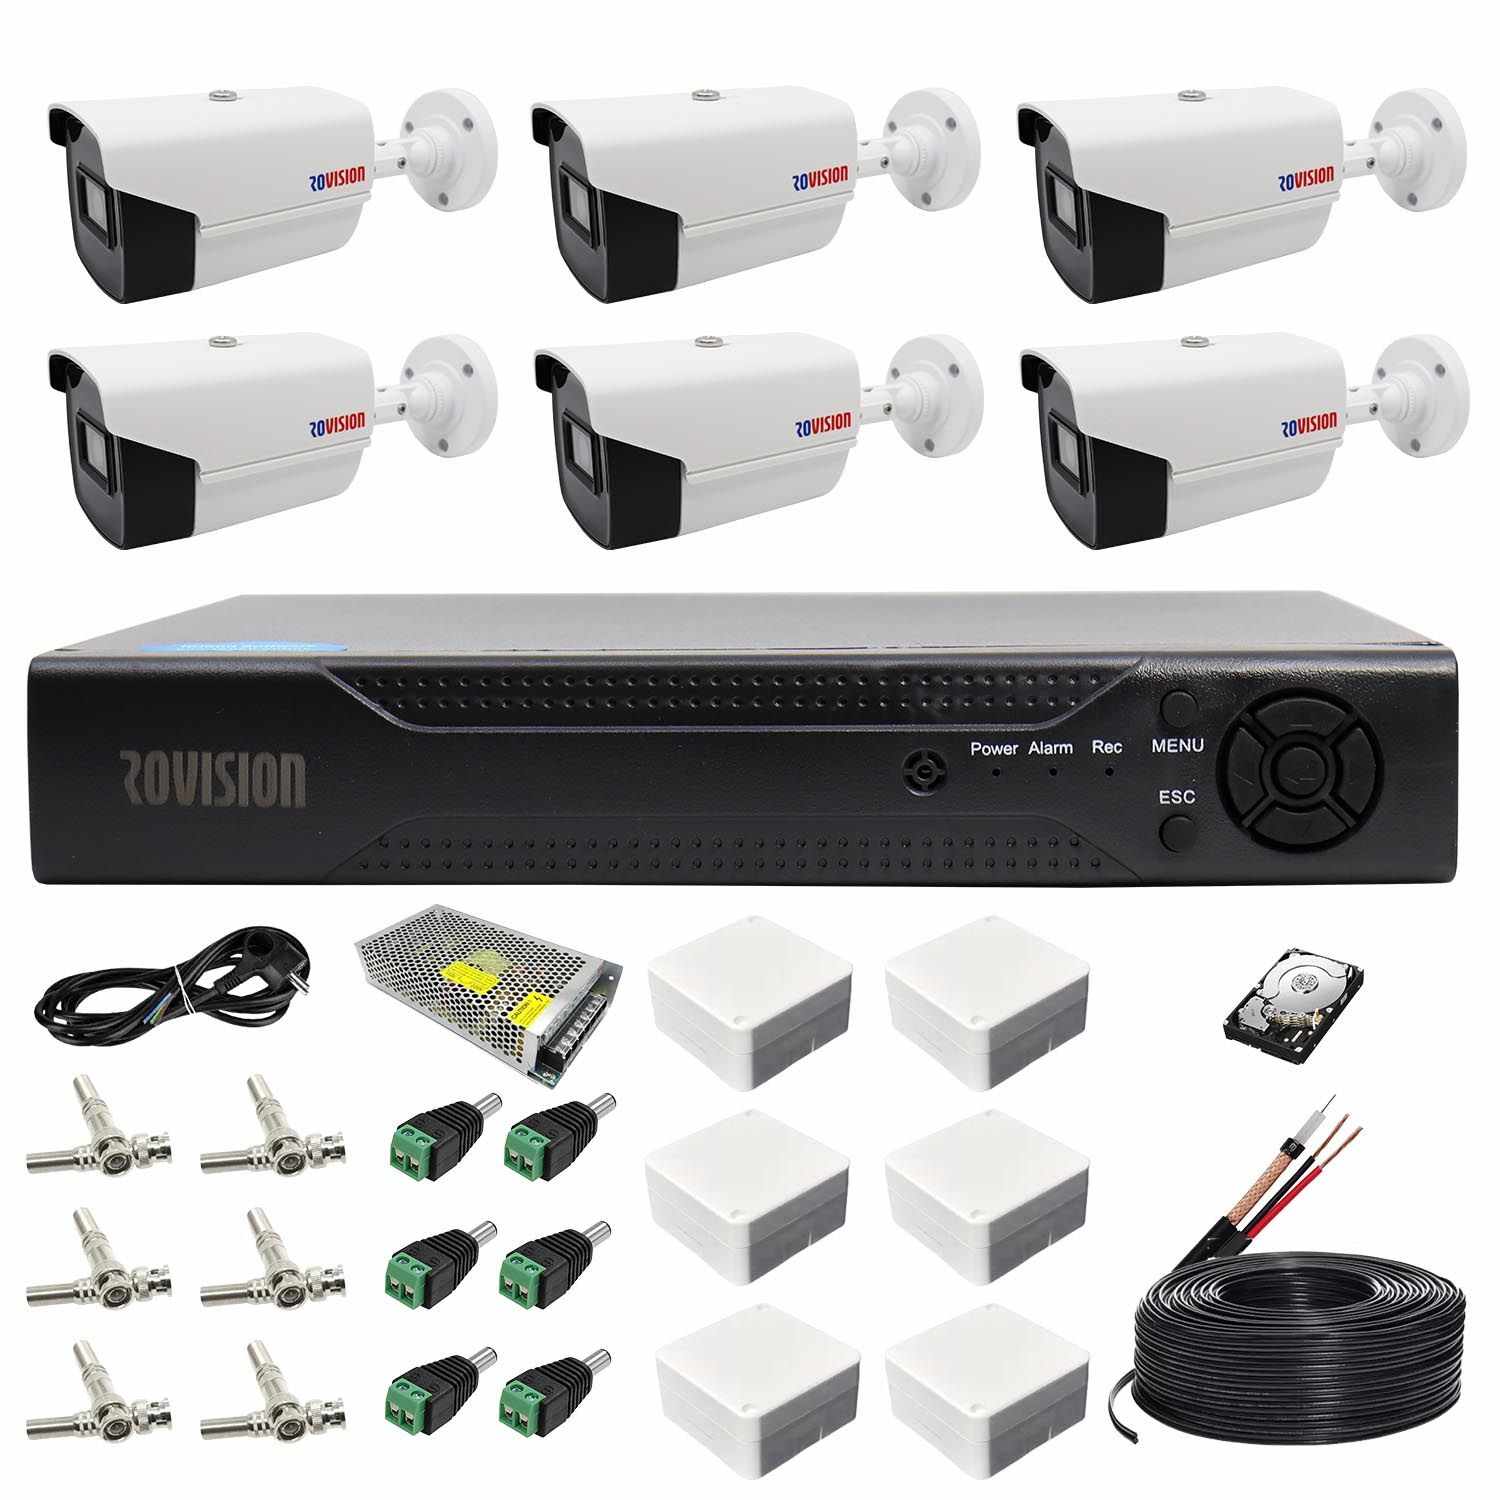 Sistem supraveghere 6 camere Rovision oem Hikvision 2MP Full HD, DVR Pentabrid 8 canale, full hd, accesorii si hard incluse